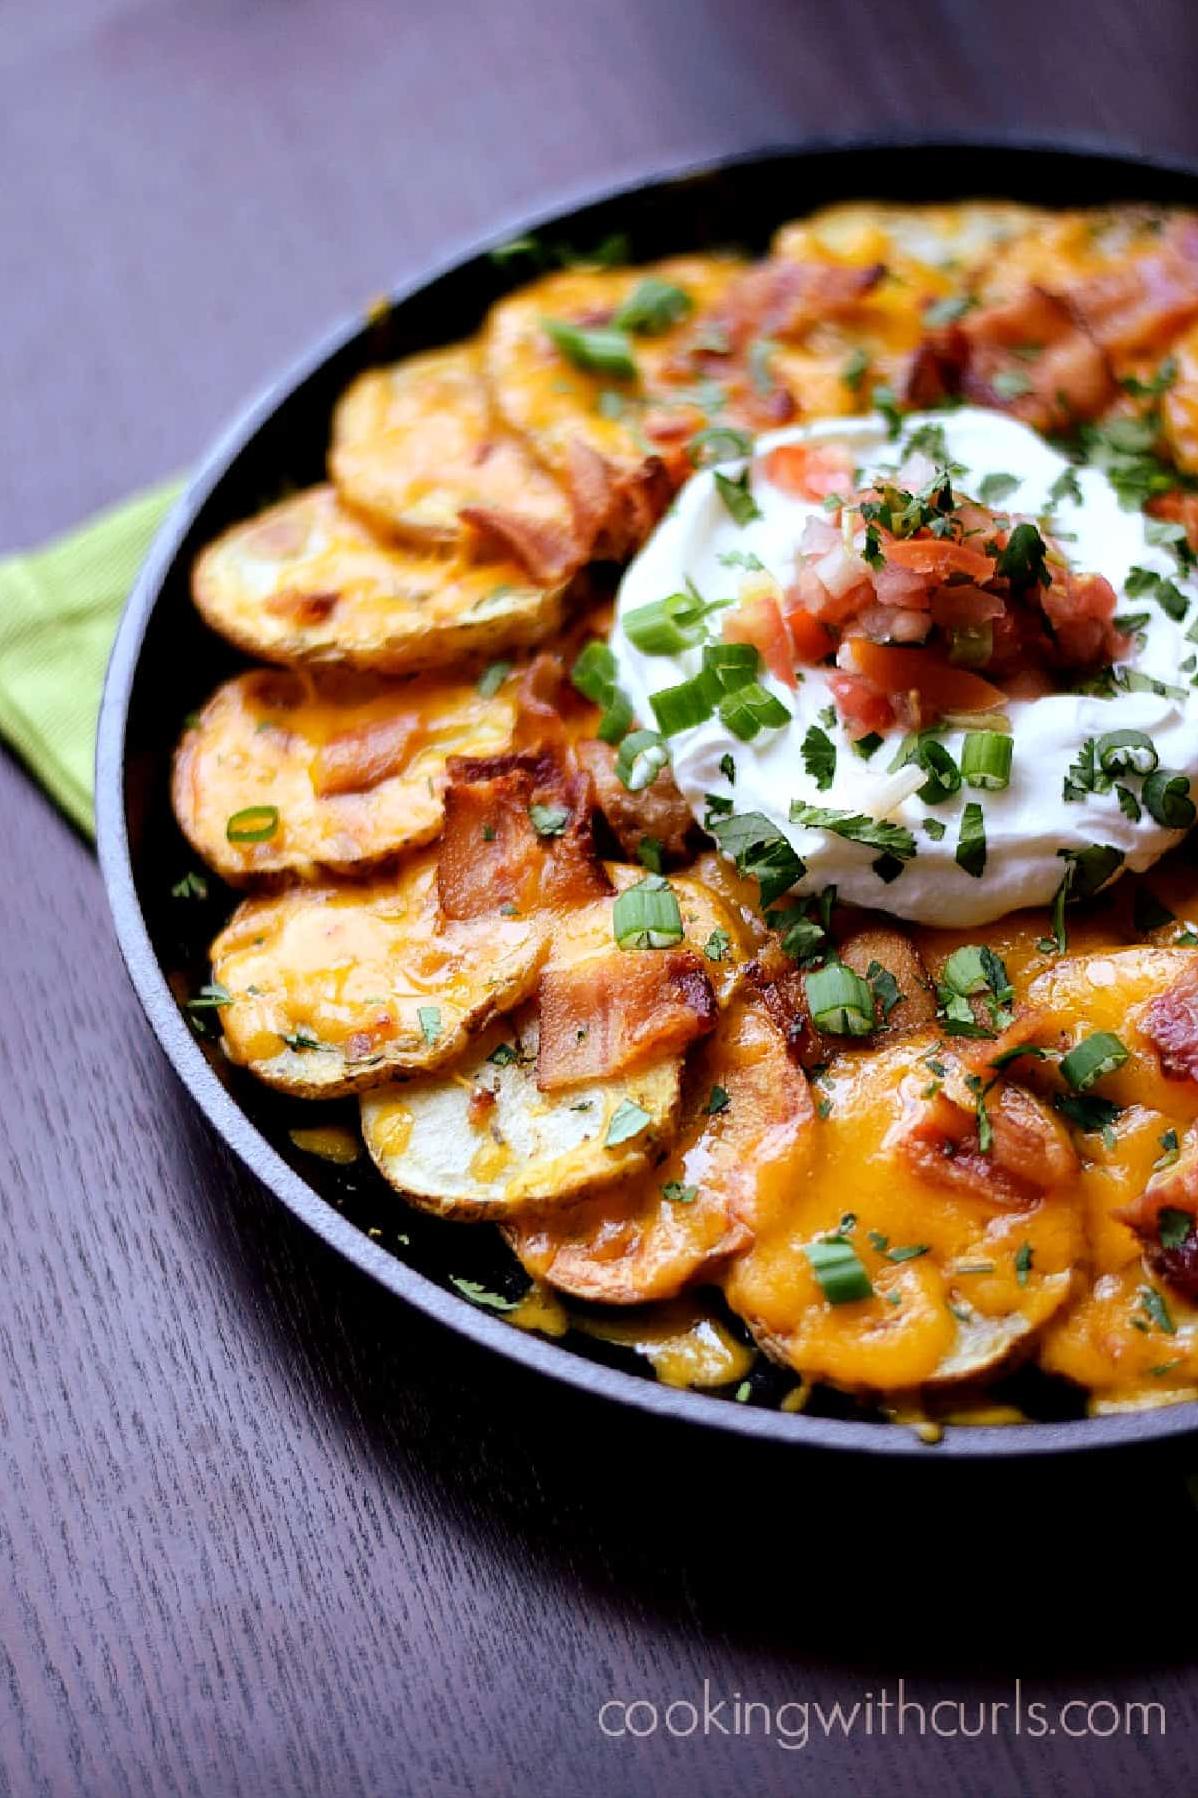  Take a break from ordinary tortilla chips and try these crispy potato chips instead.